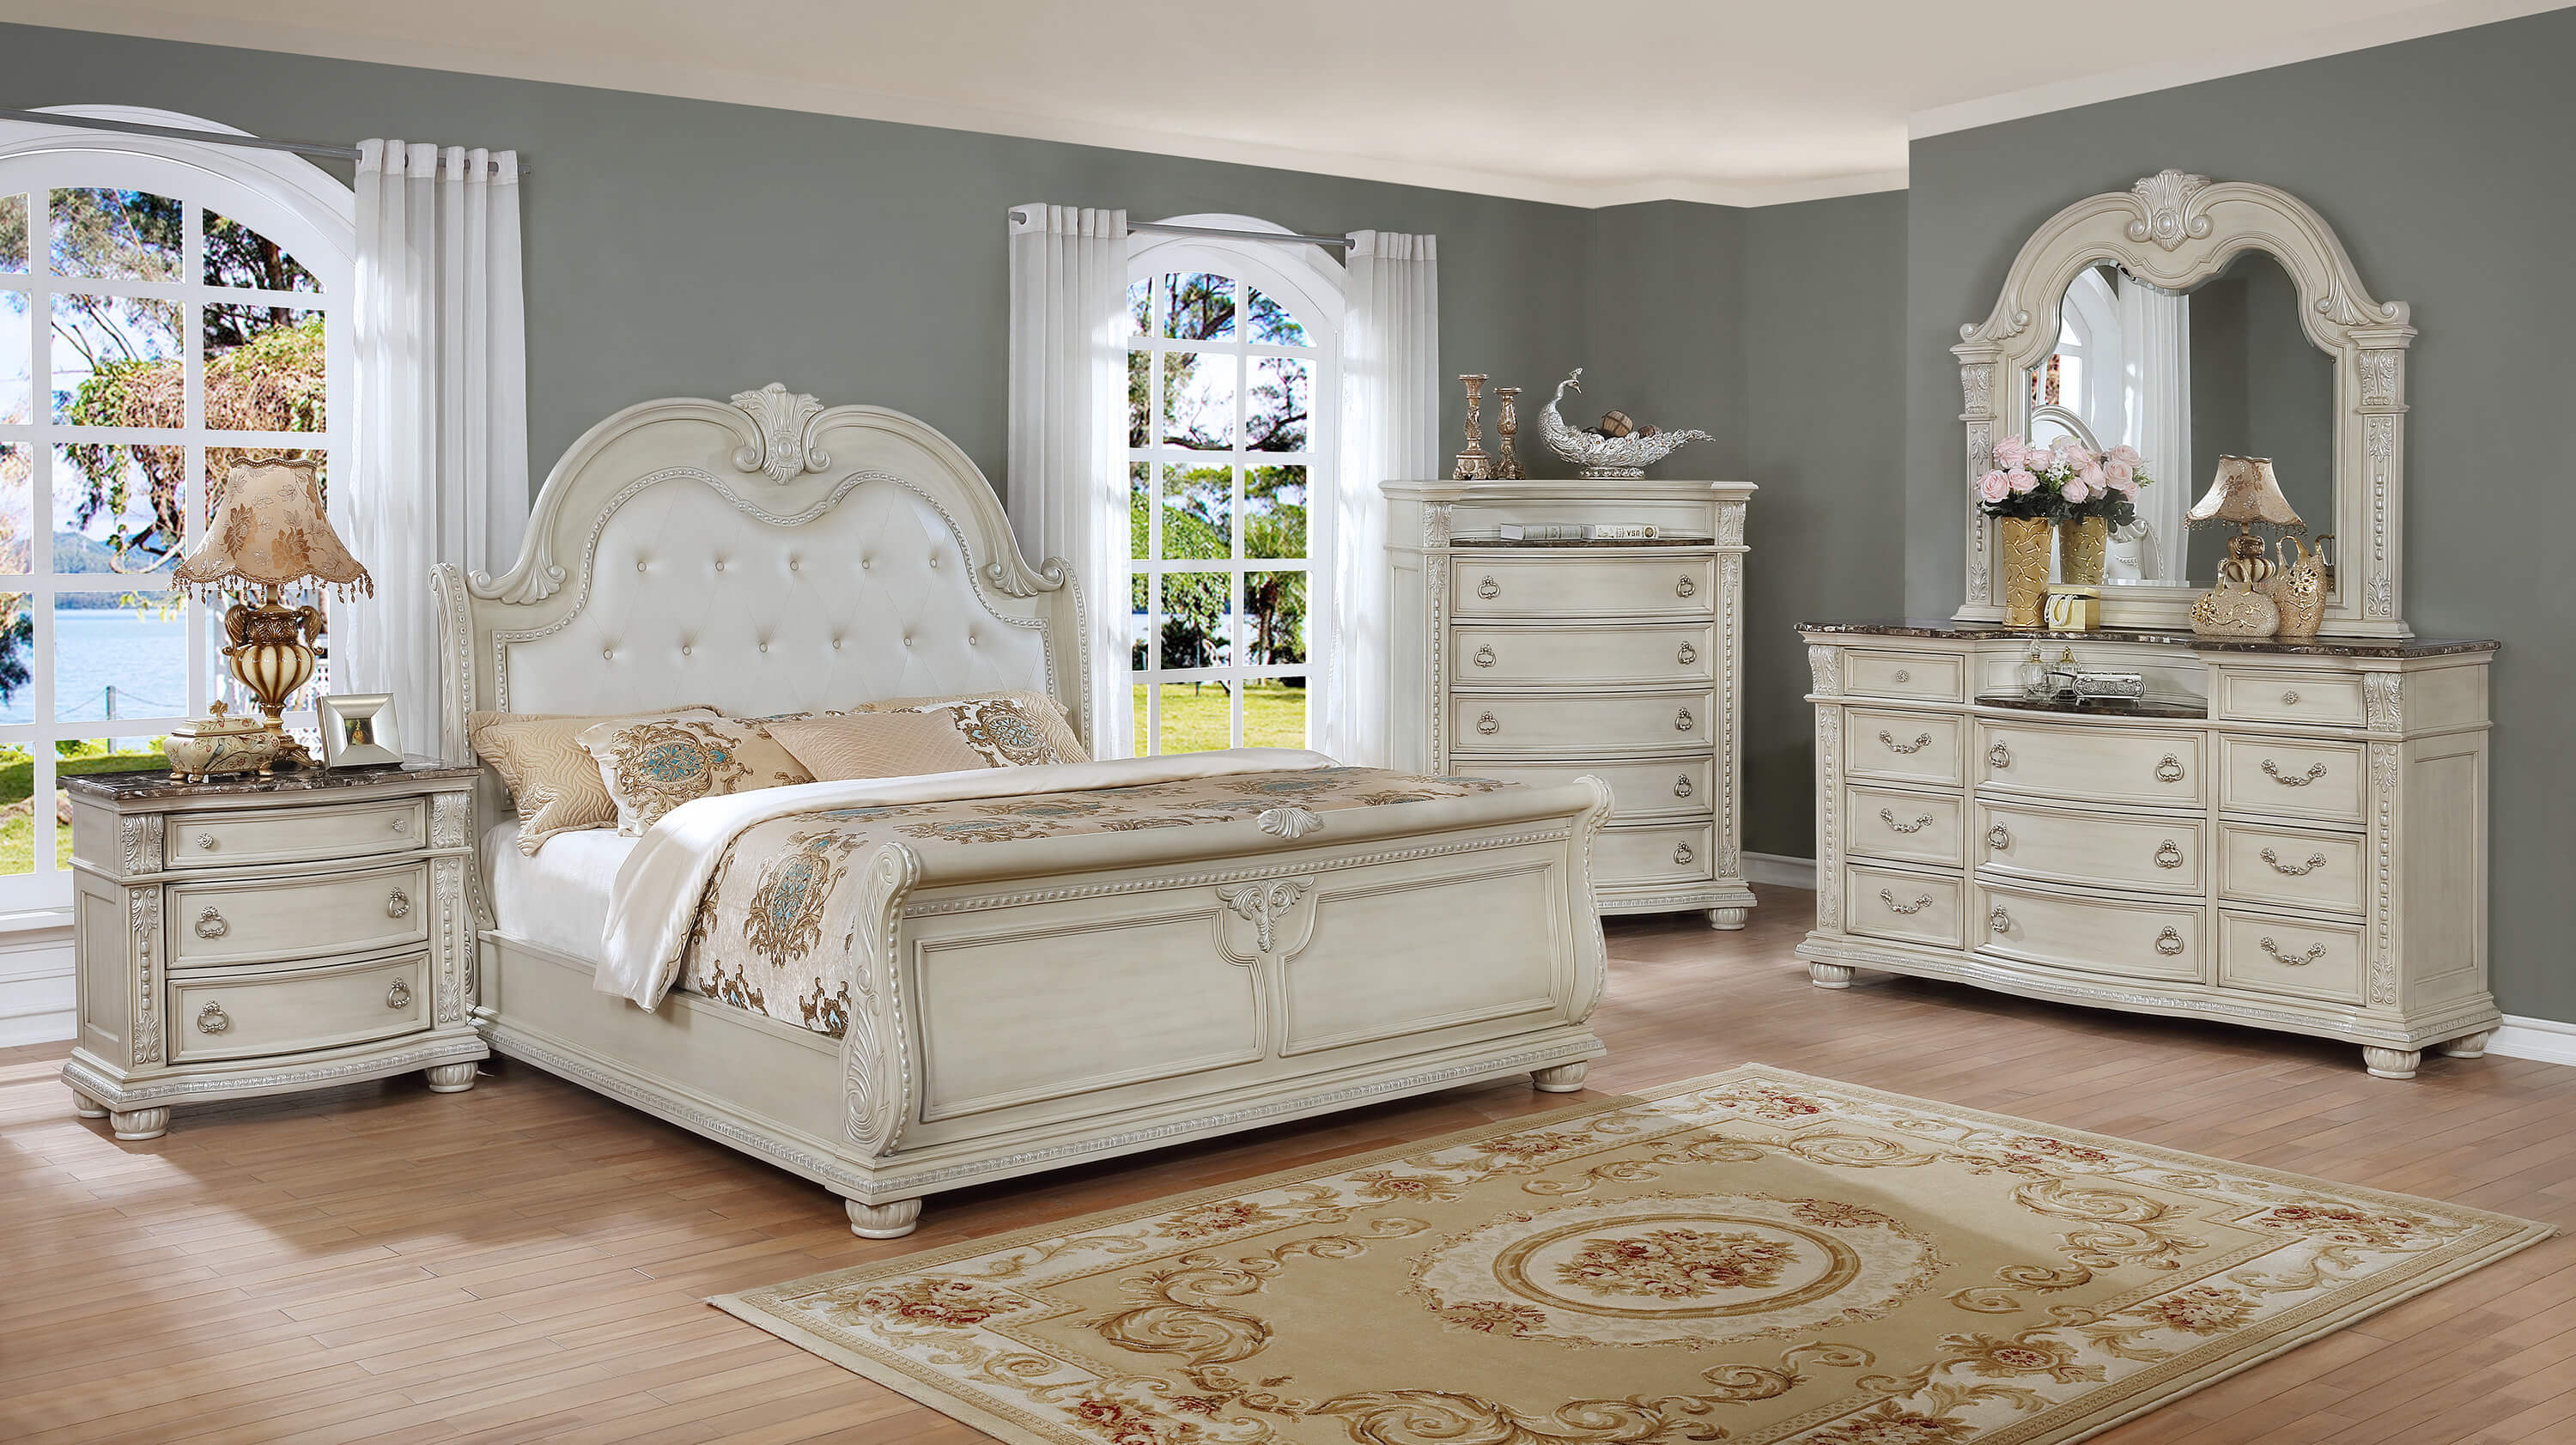 B1630 Stanley Antique White Marble Bedroom Set Crown Mark within sizing 3000 X 1683